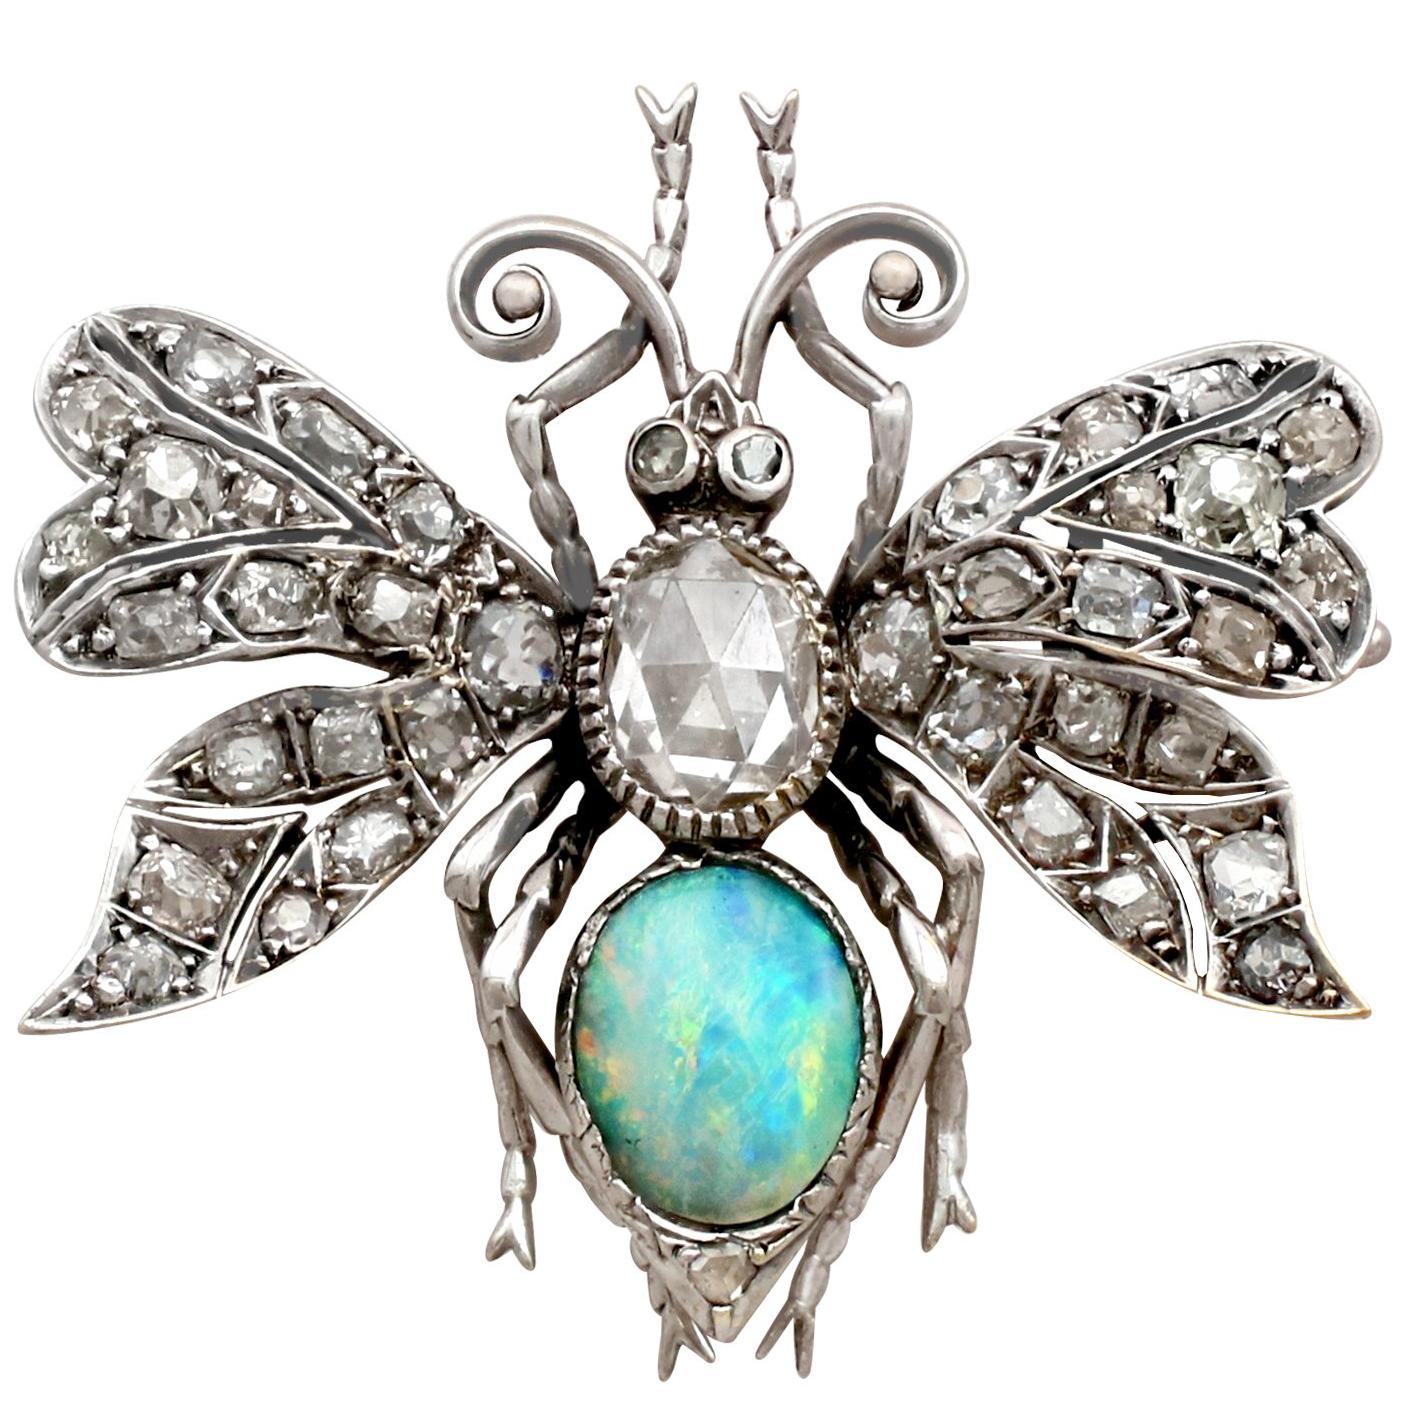 Antique 2.53 Carat Diamond and Opal Insect Brooch